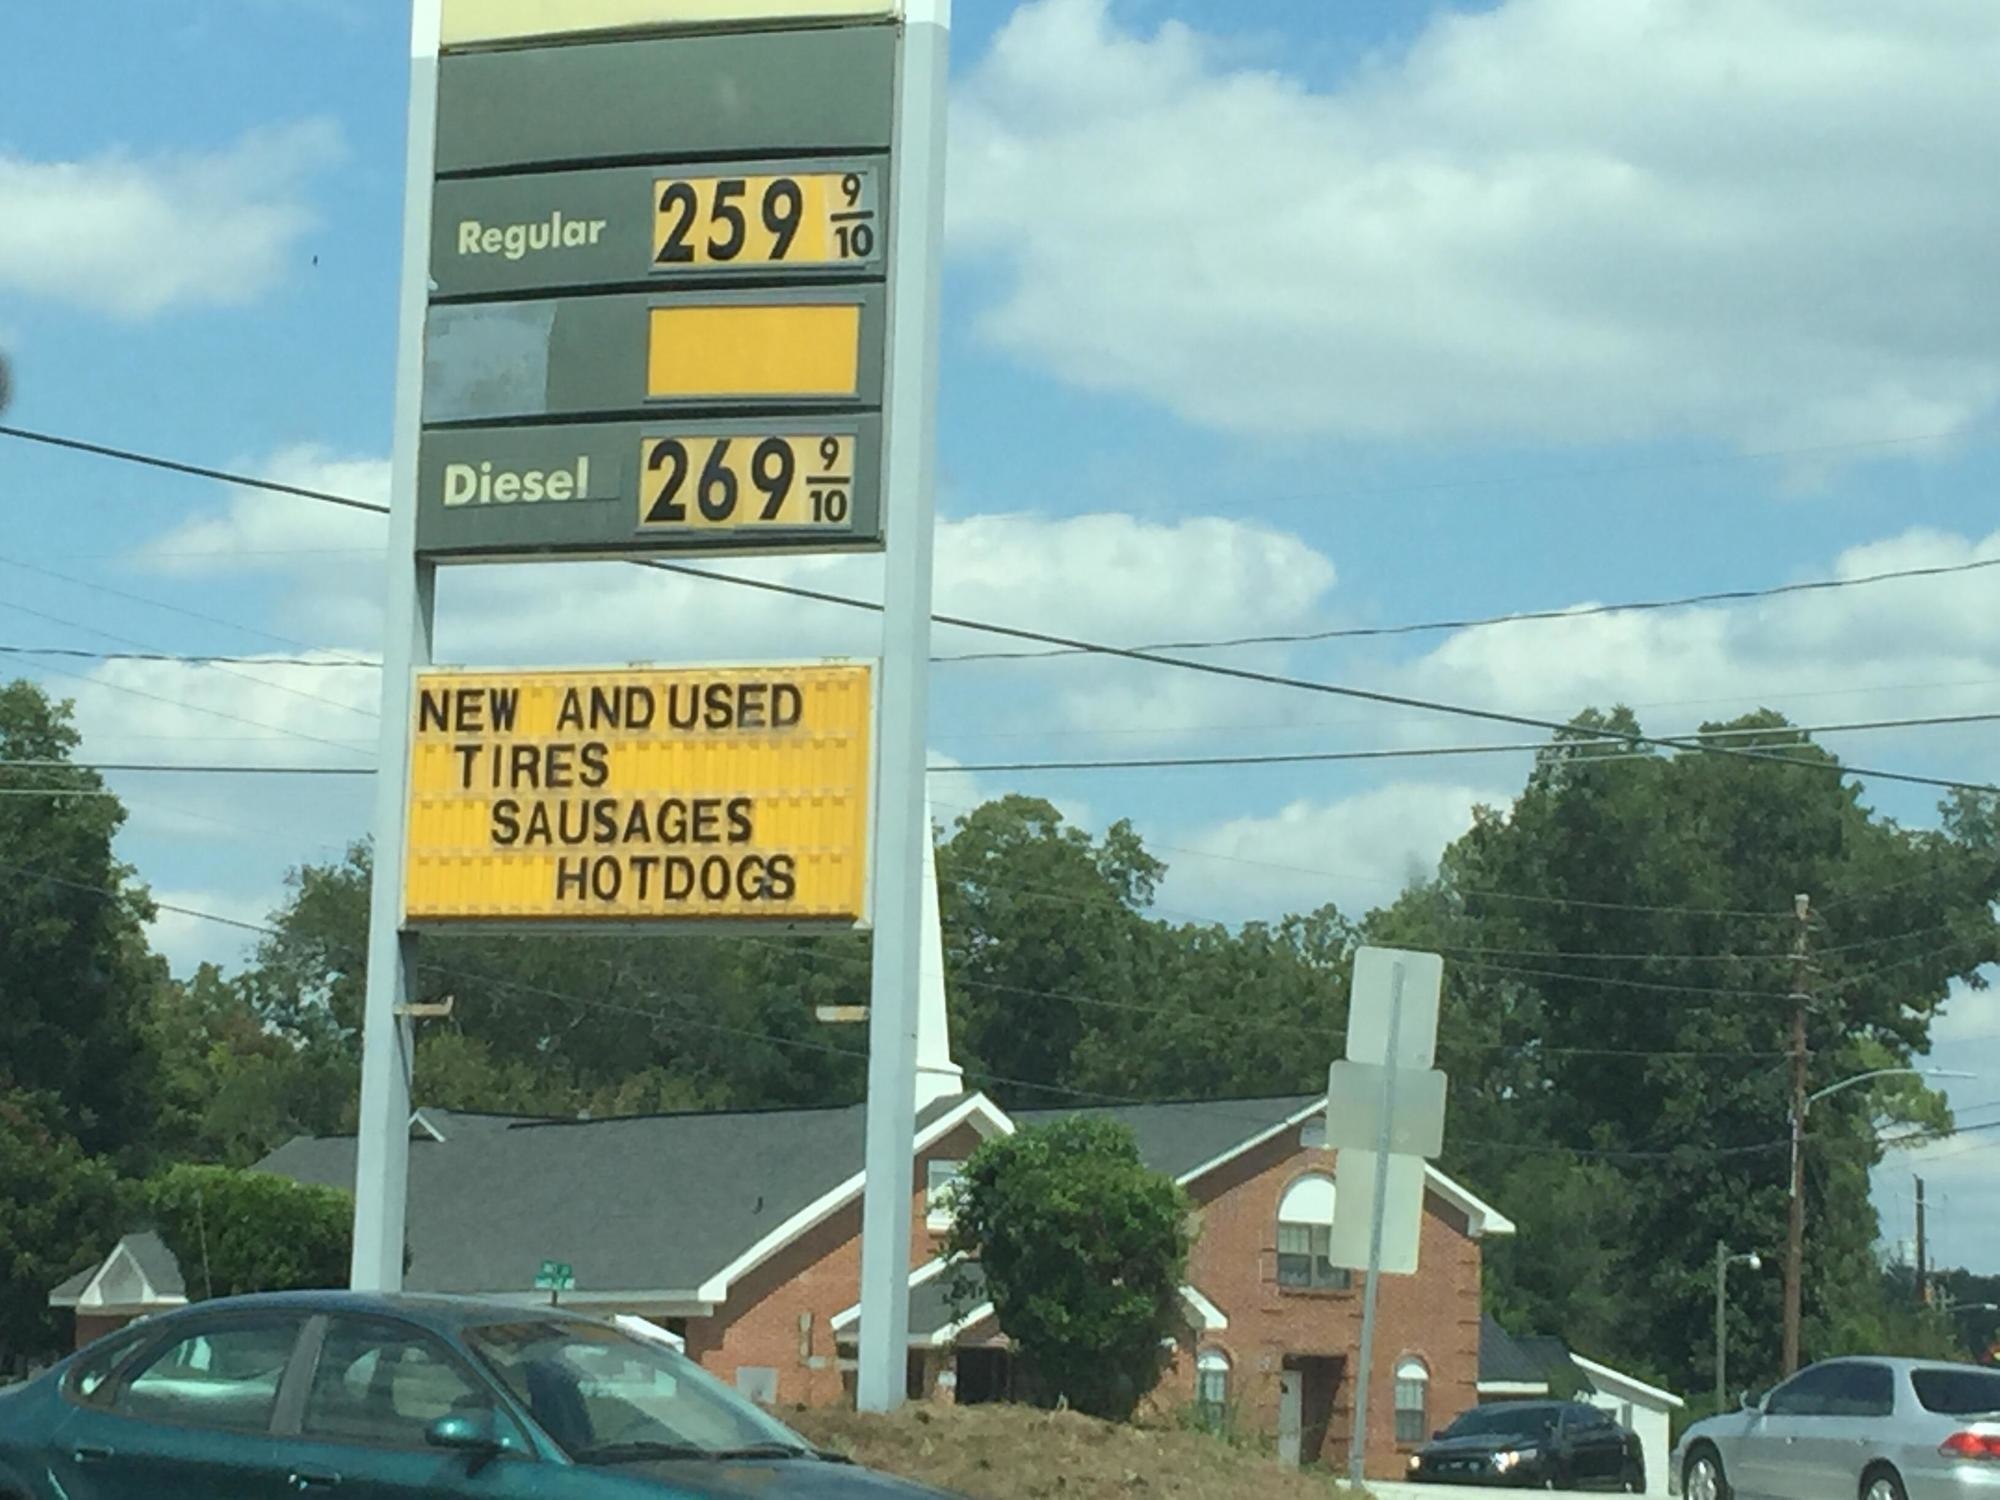 Sign at gas station that sells New and used tires, sausages and hot dogs.